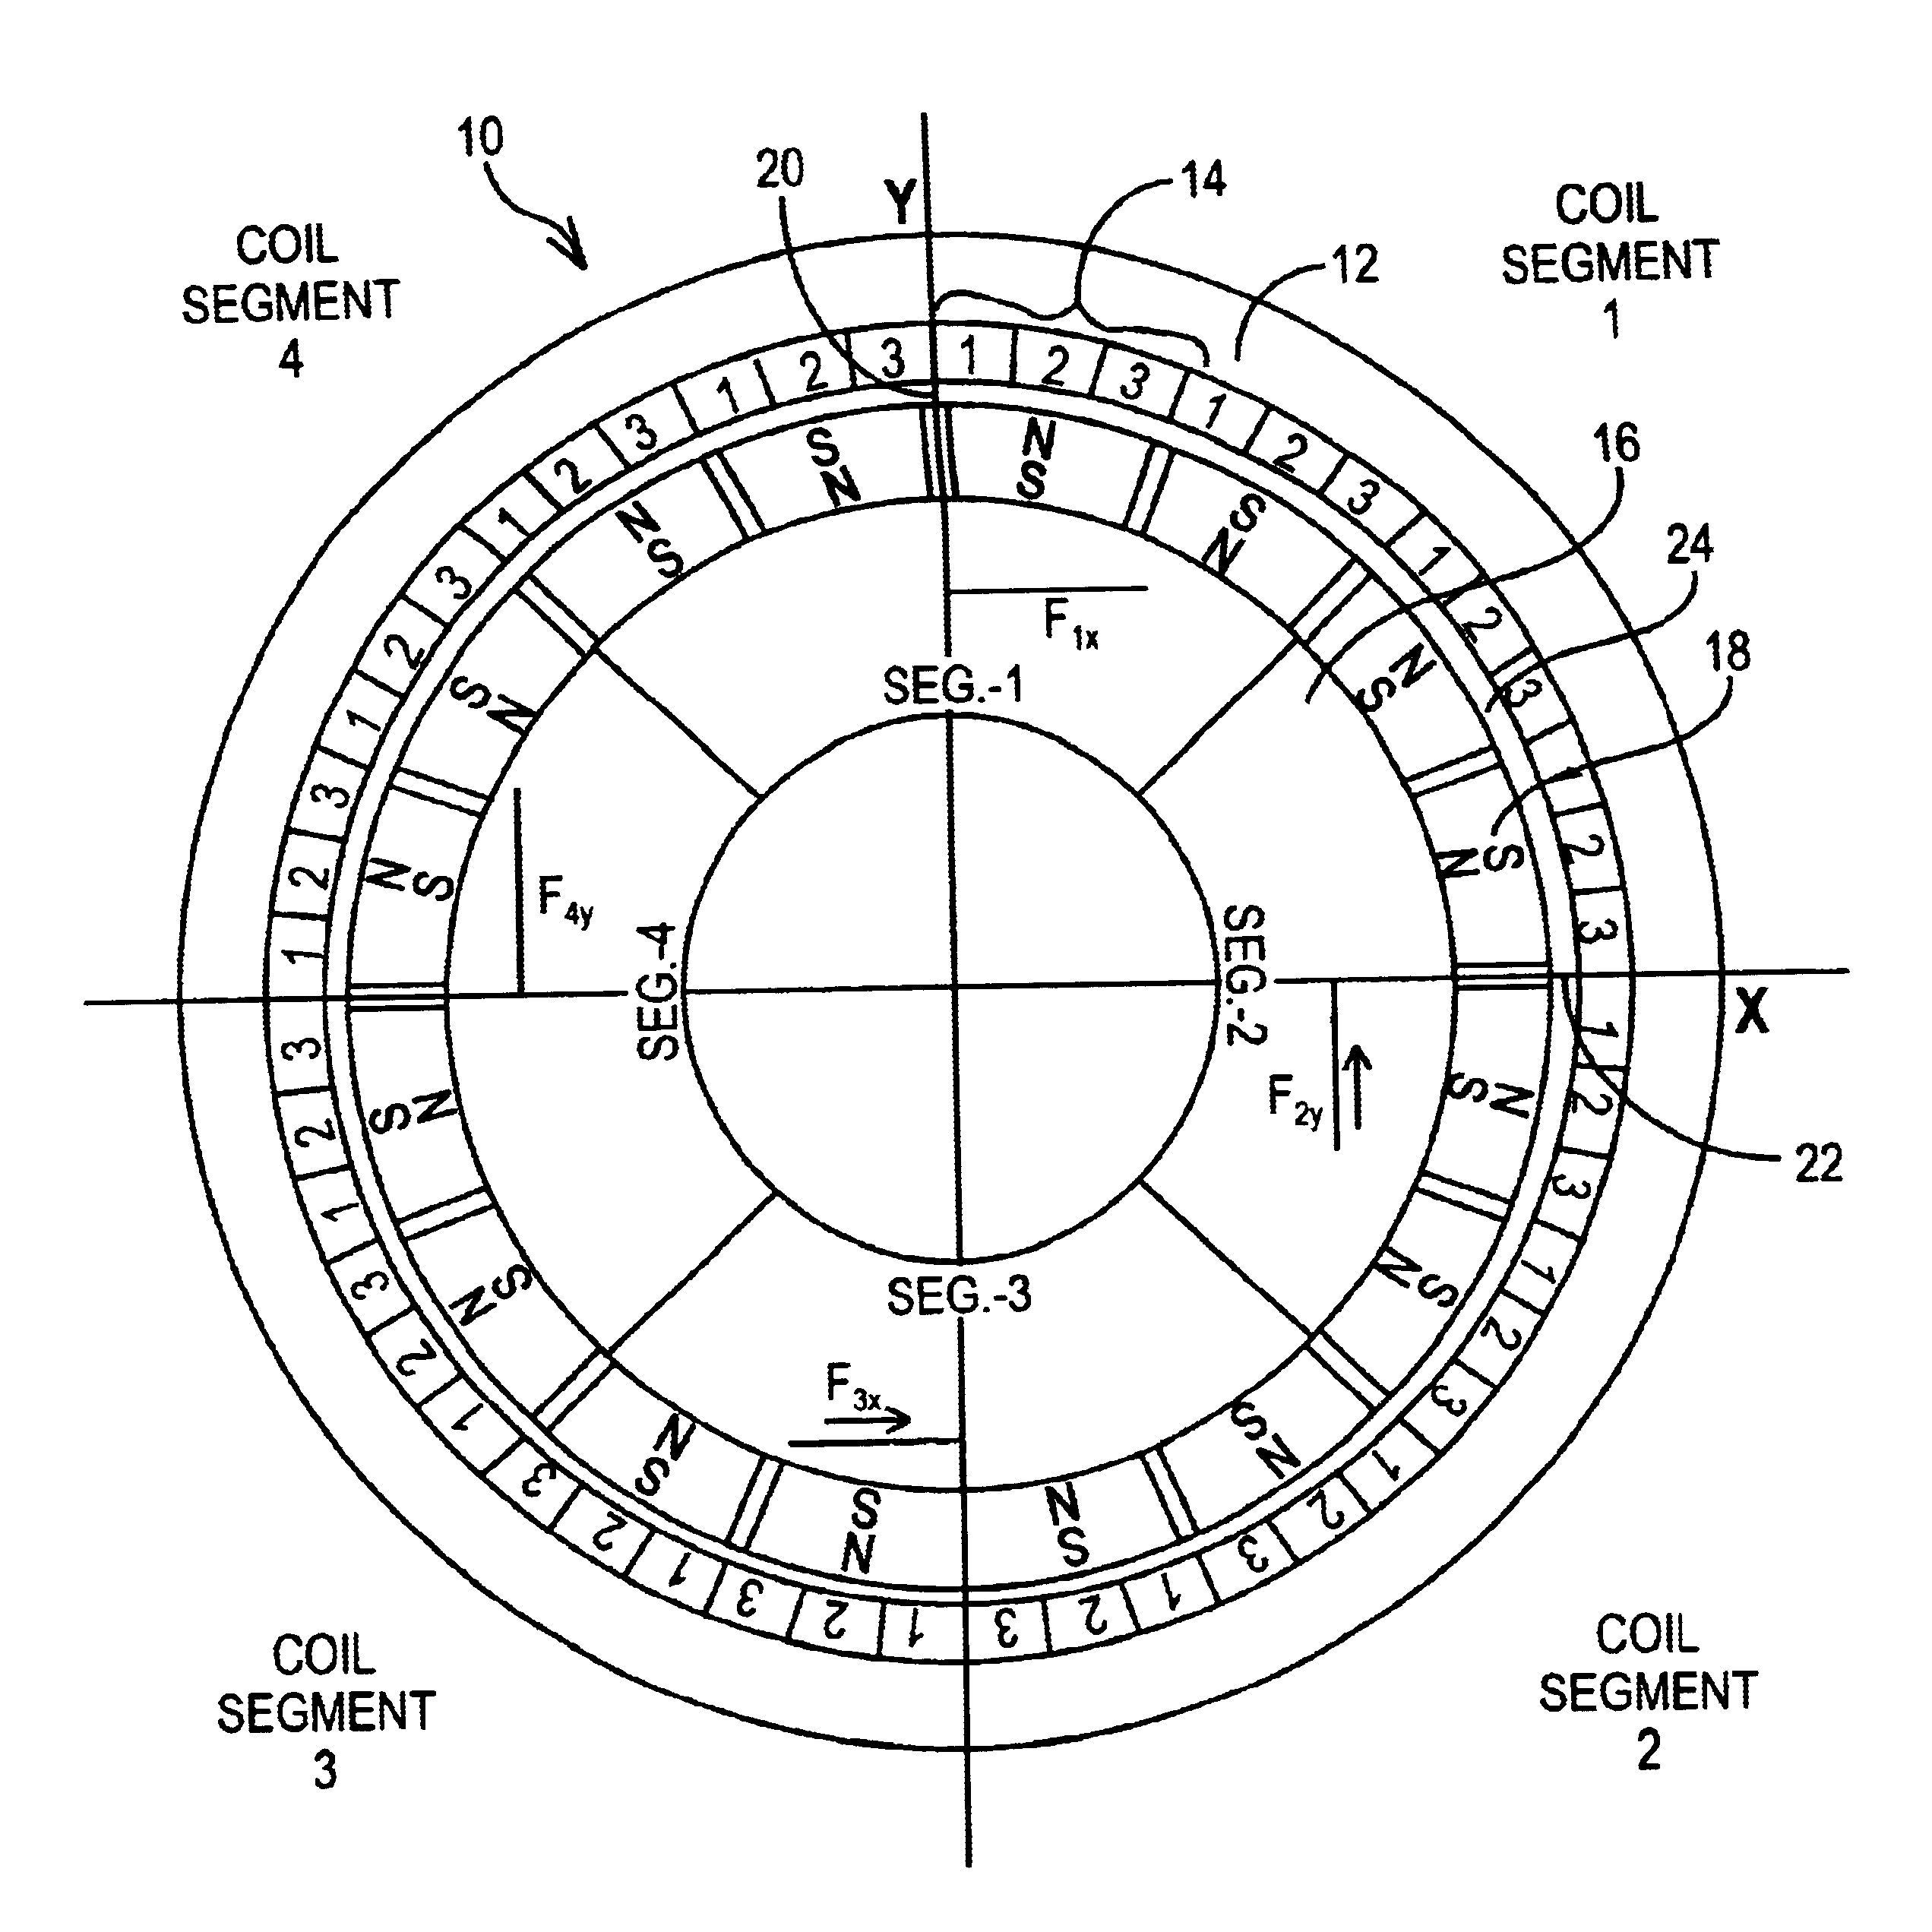 Integrated magnetic bearing